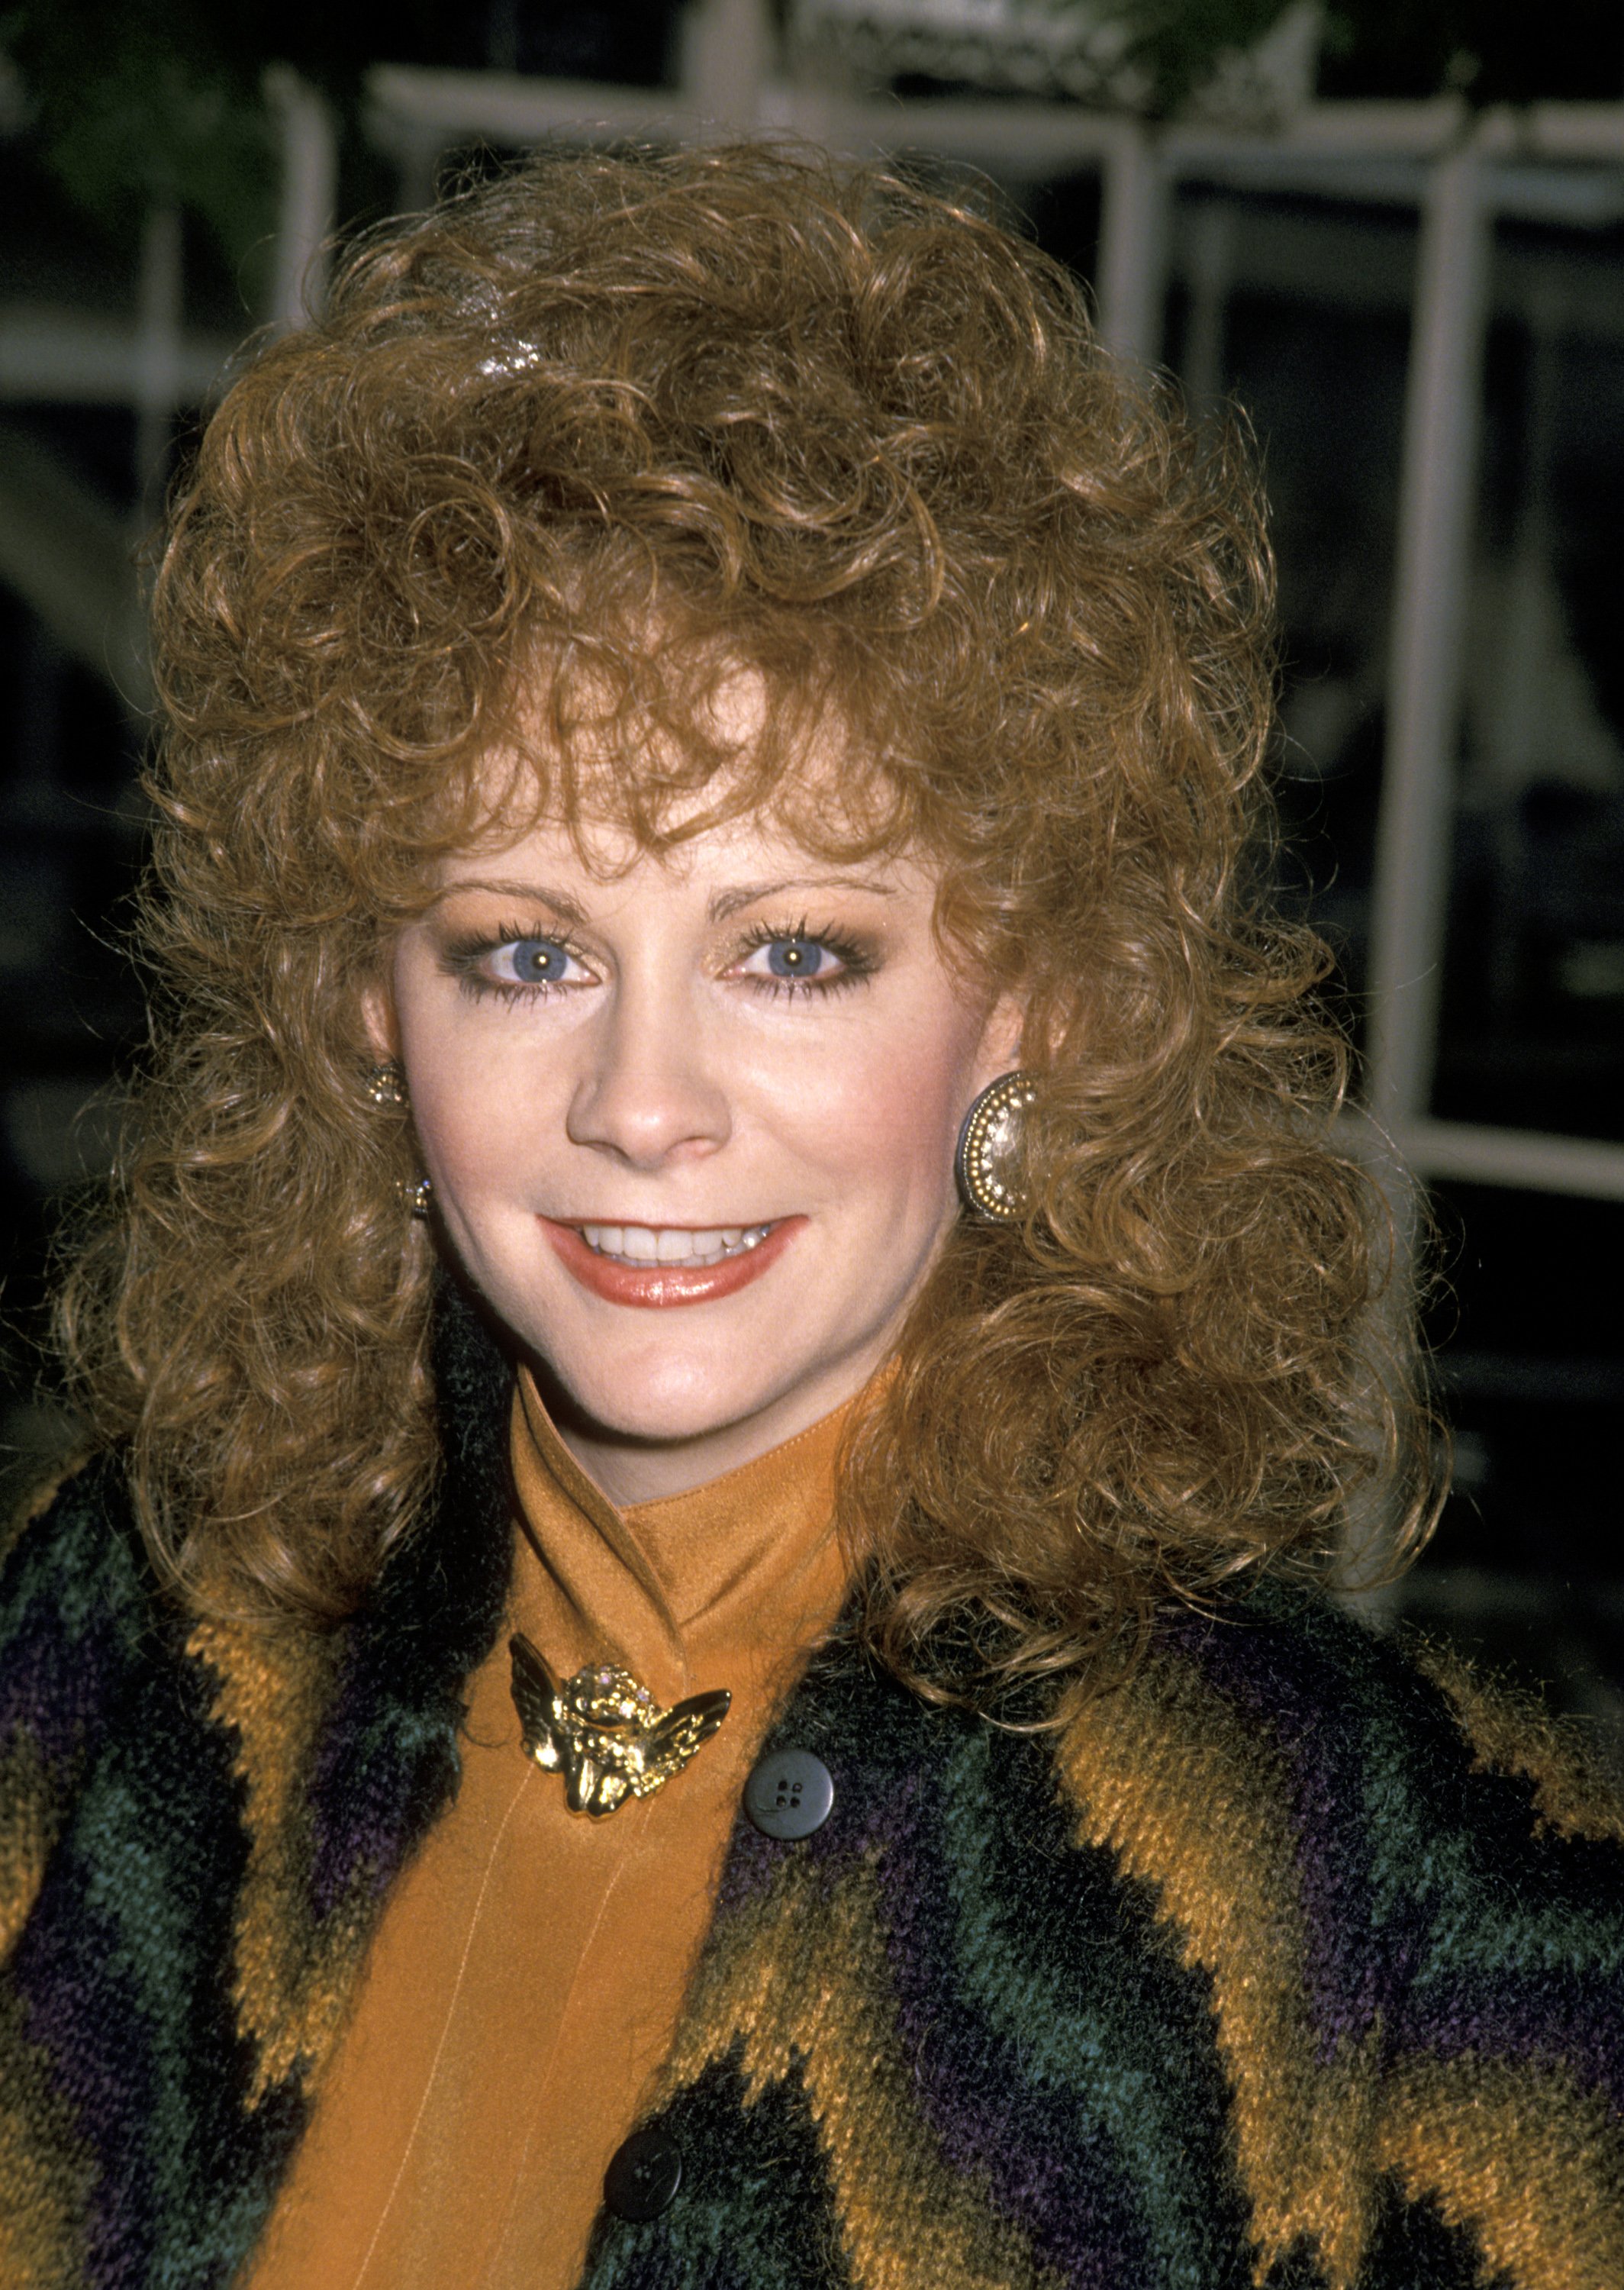 Reba McEntire at the 24th Annual Academy of Country Music Awards Nominations on February 28, 1989 | Photo: Getty Images